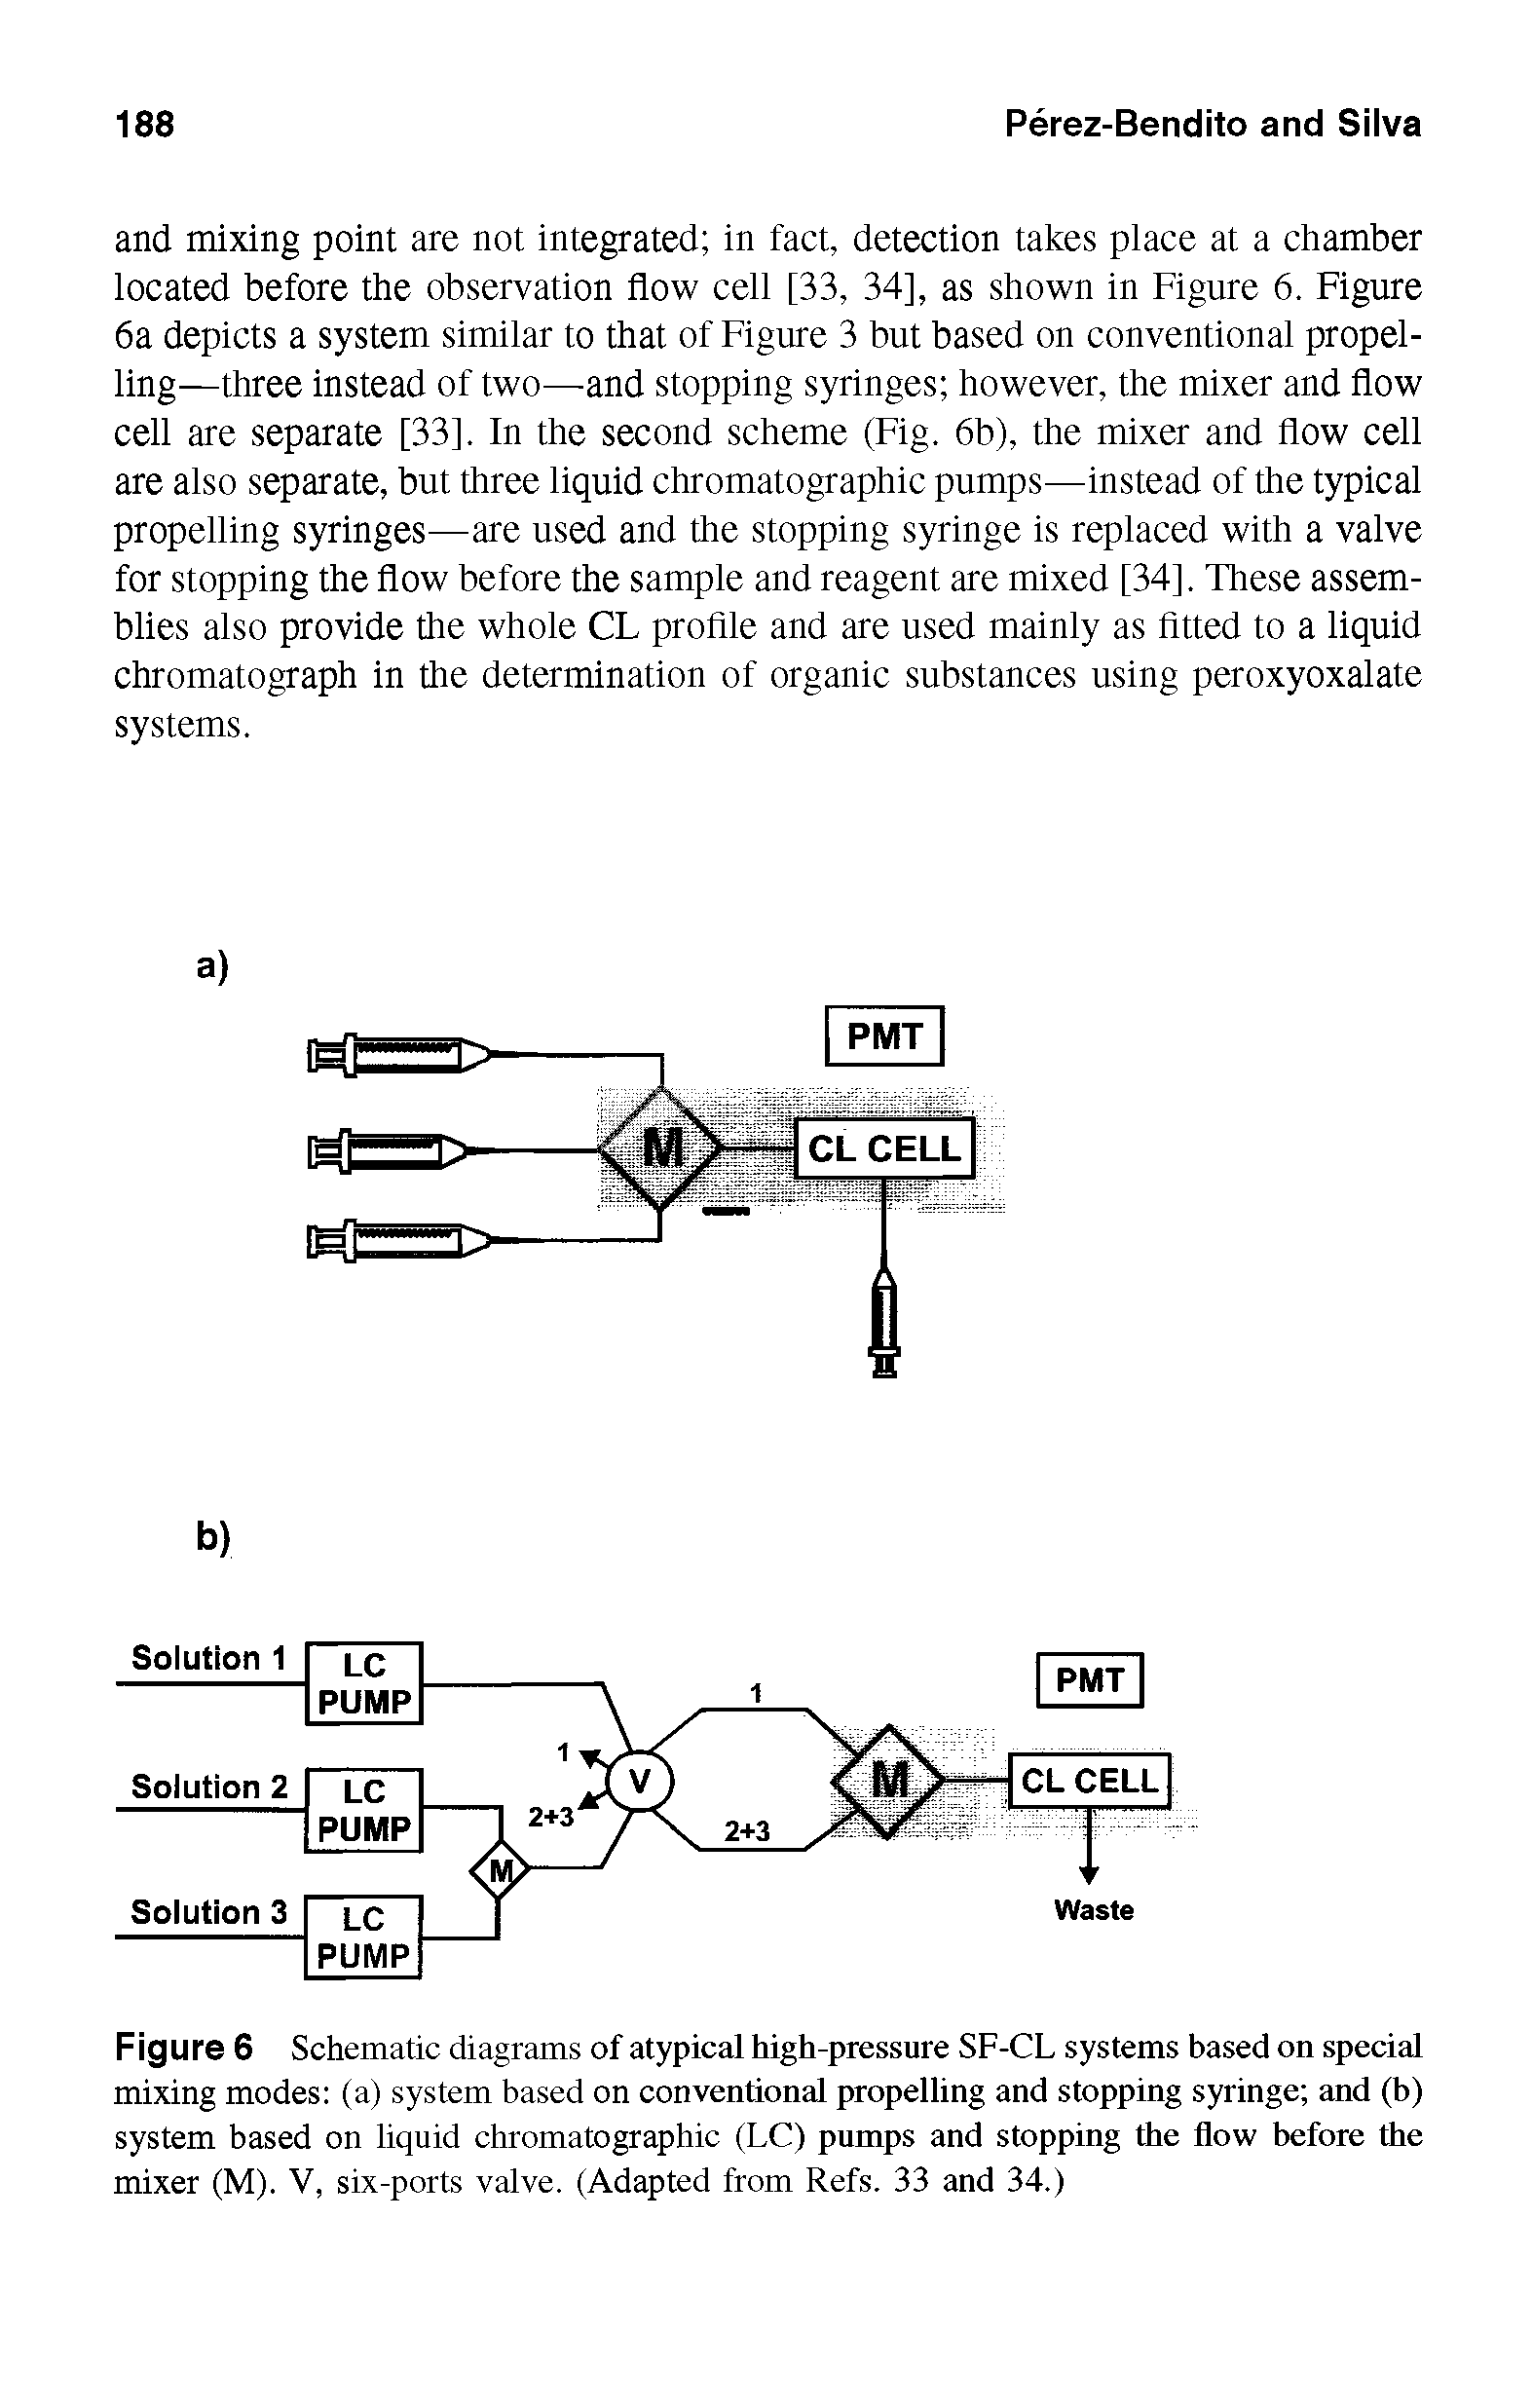 Figure 6 Schematic diagrams of atypical high-pressure SF-CL systems based on special mixing modes (a) system based on conventional propelling and stopping syringe and (b) system based on liquid chromatographic (LC) pumps and stopping the flow before the mixer (M). V, six-ports valve. (Adapted from Refs. 33 and 34.)...